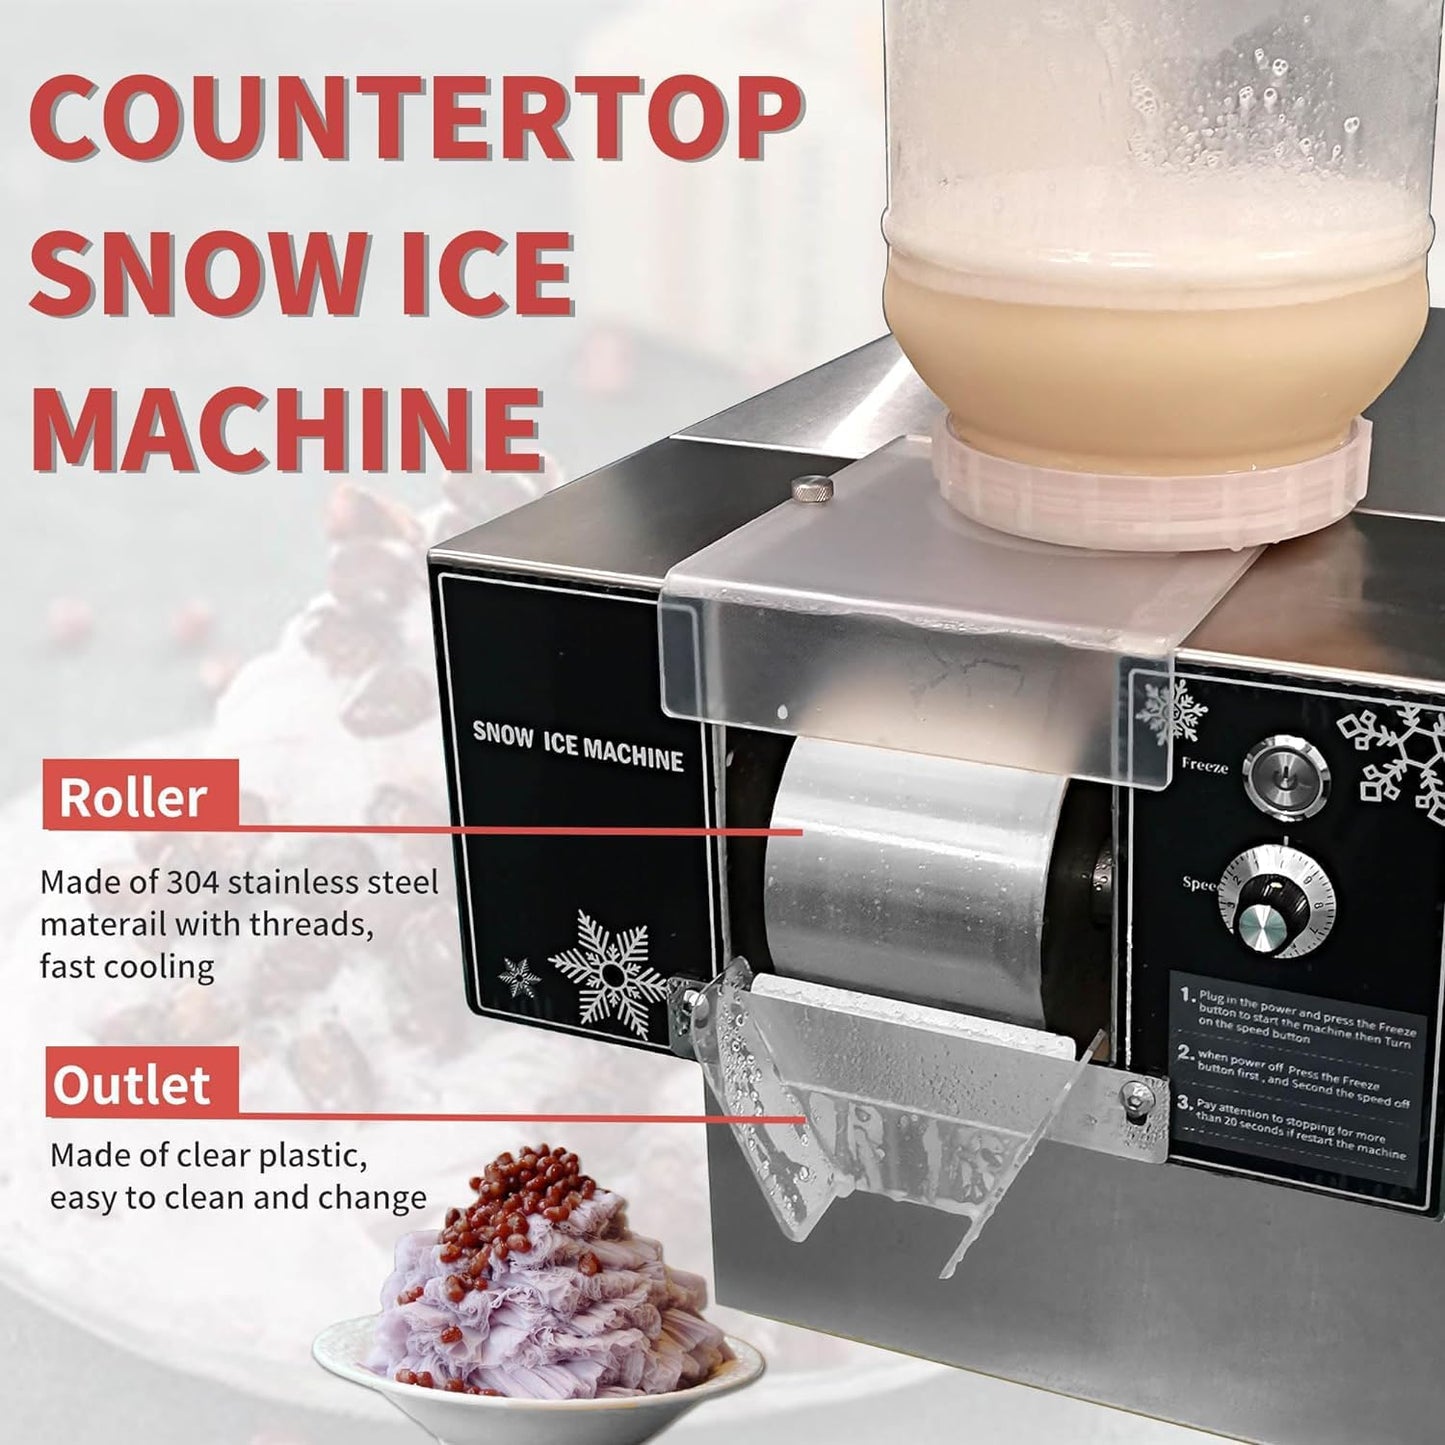 COOLBABY YLY077 Premium Multi-functional Snowflake Ice Machine - COOLBABY